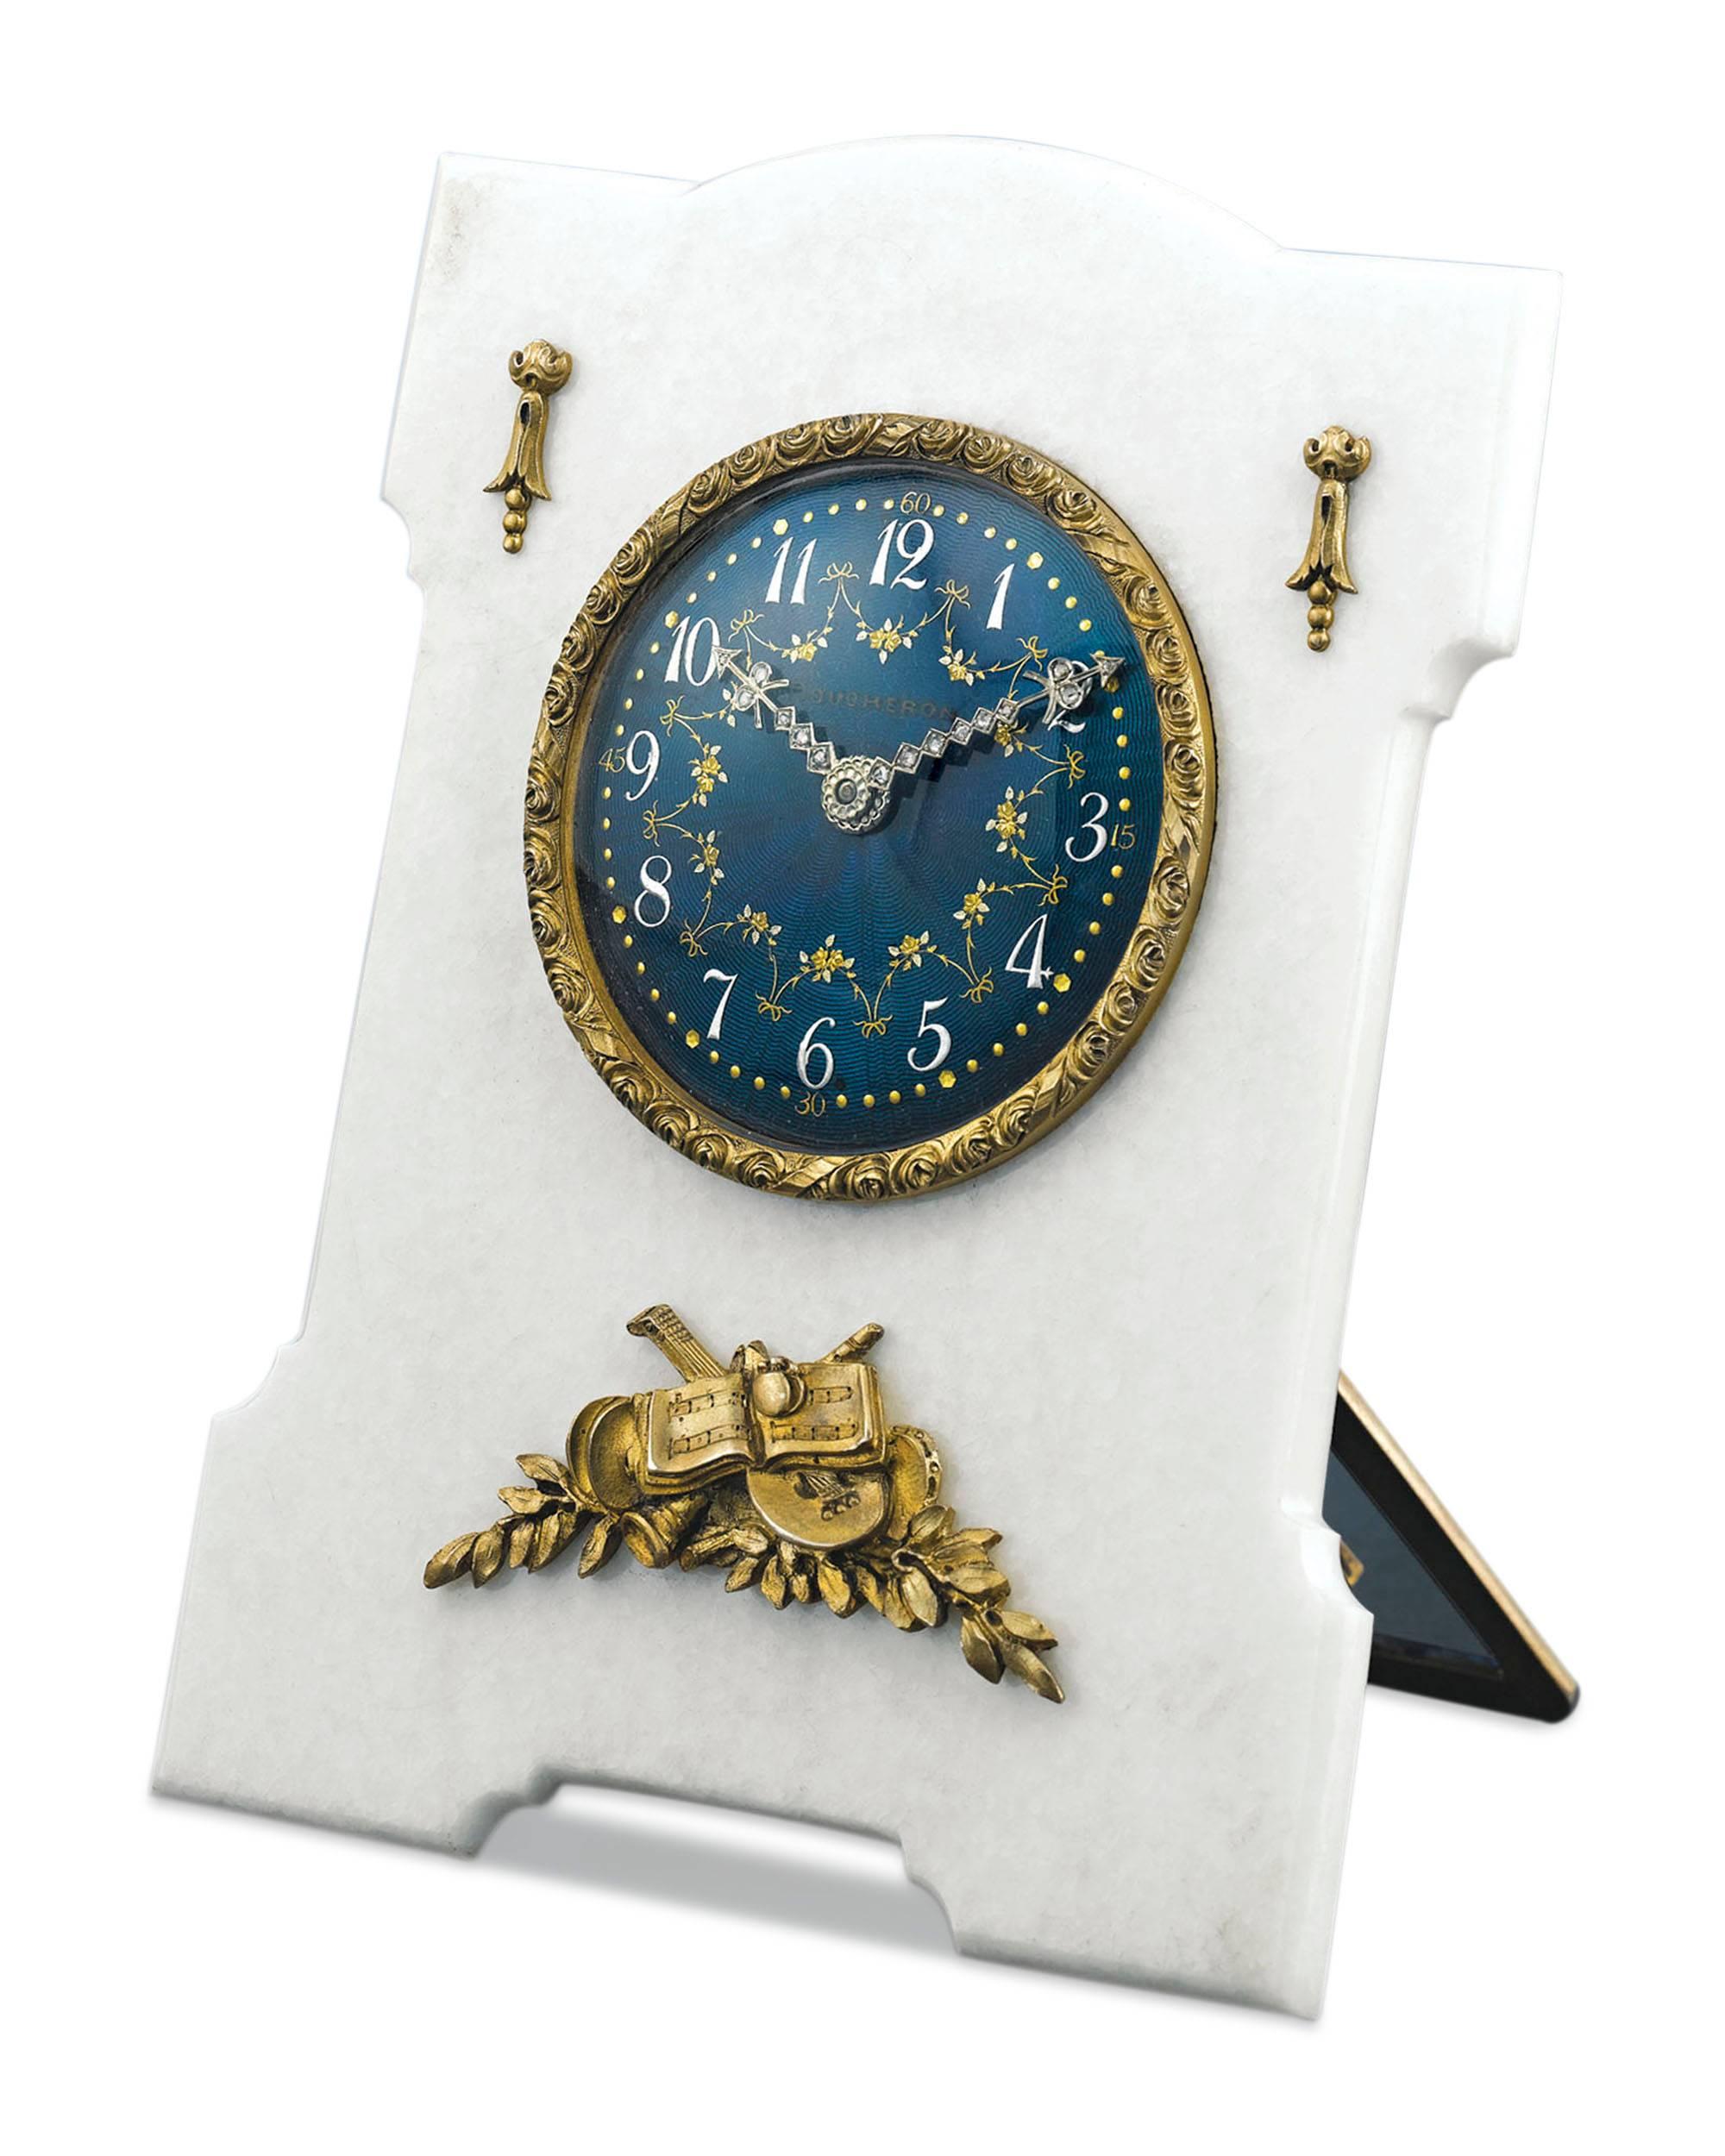 This remarkable desk clock by Boucheron is a beautiful objet d’art by one of the most famous names in luxury. The timepiece is crafted of a solid white marble, silver, bronze and exquisite guilloché enamel. Housed in its original fitted case, this